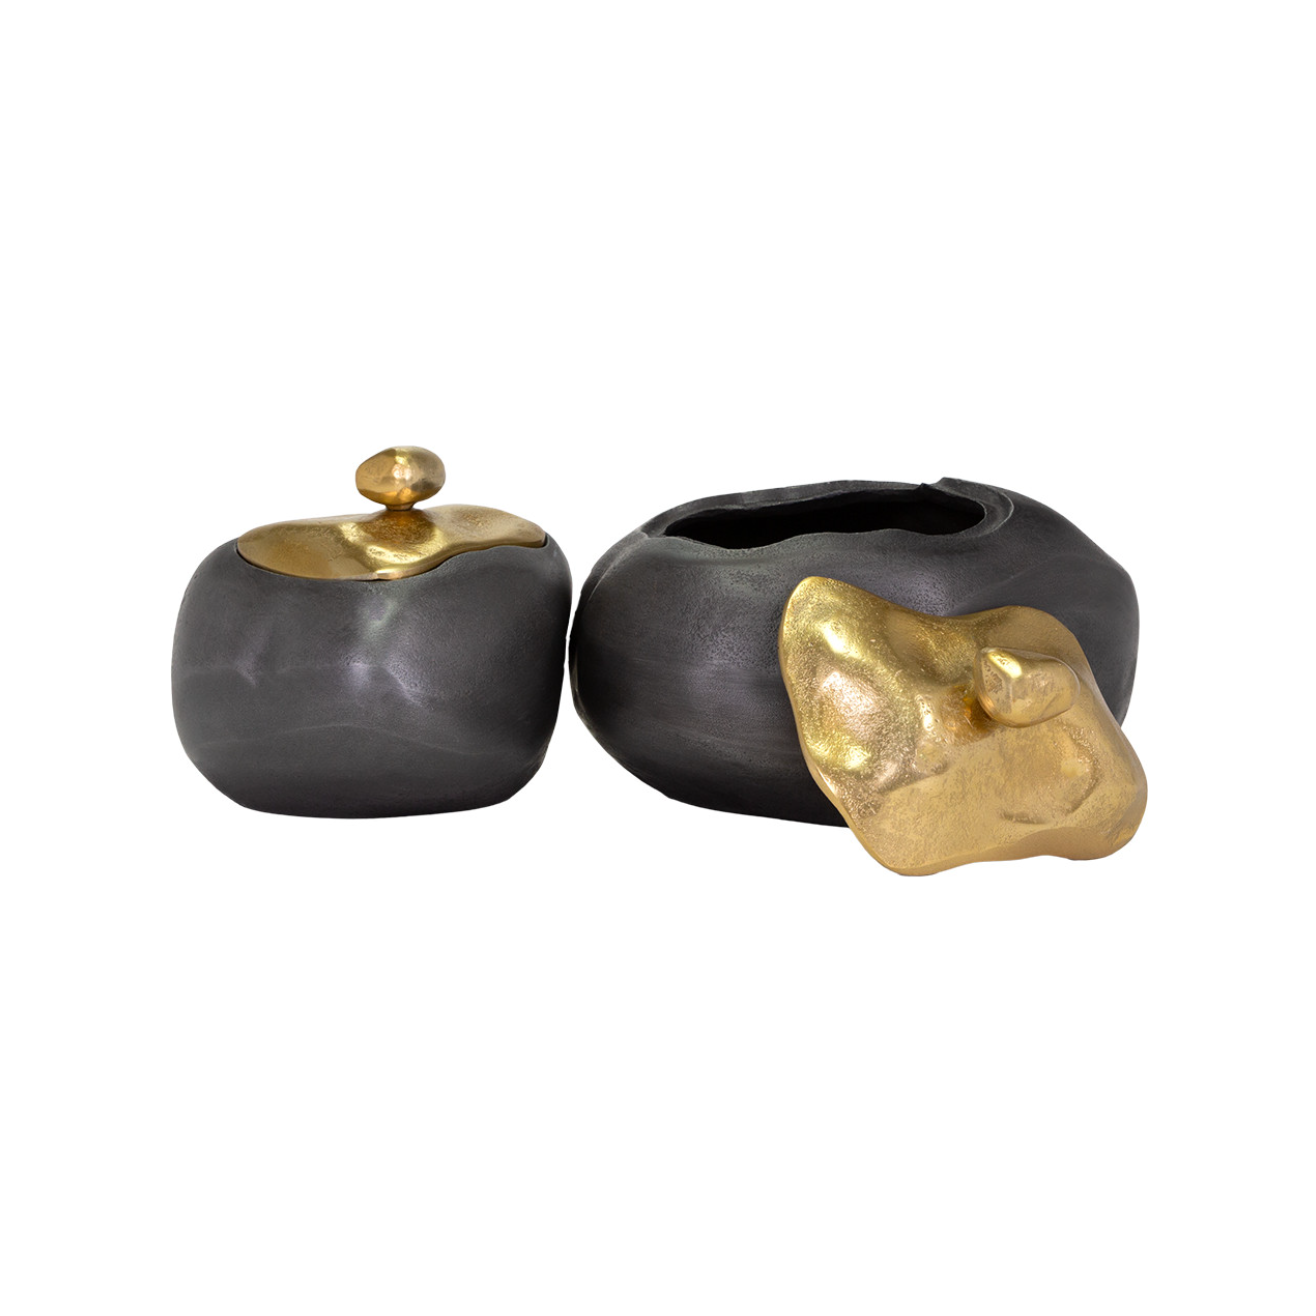 Two Finkle Box decorative ceramic pots with metallic gold details, reminiscent of a Scottsdale Arizona bungalow style; one is completely closed with a round gold lid, and the other is open with a gold accent on the side, all against a white background. (Brand: The Import Collection)